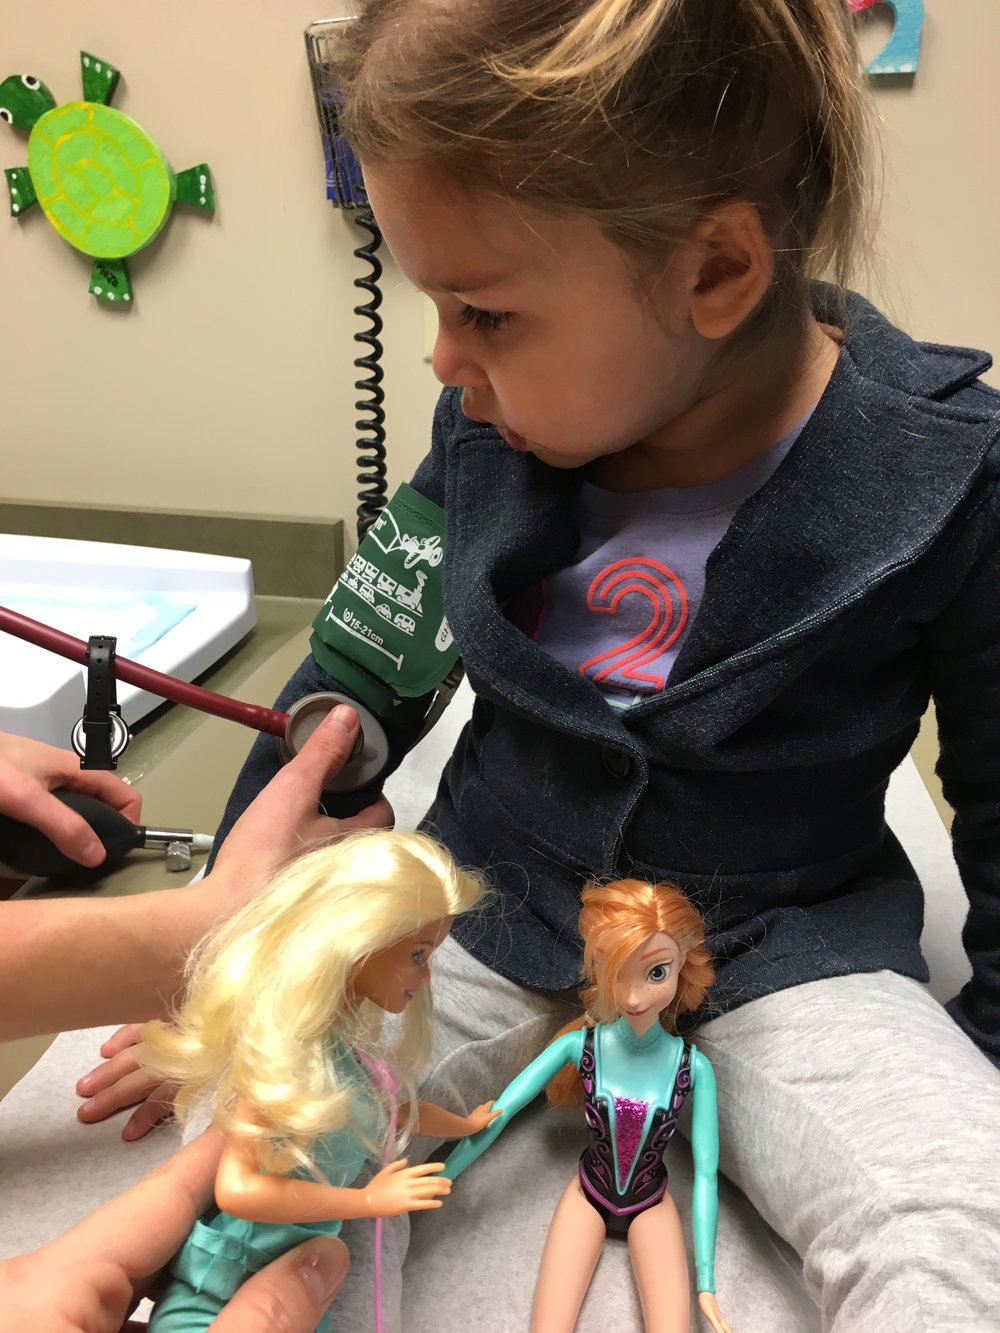 3 year well checkup with Nurse Barbie in tow